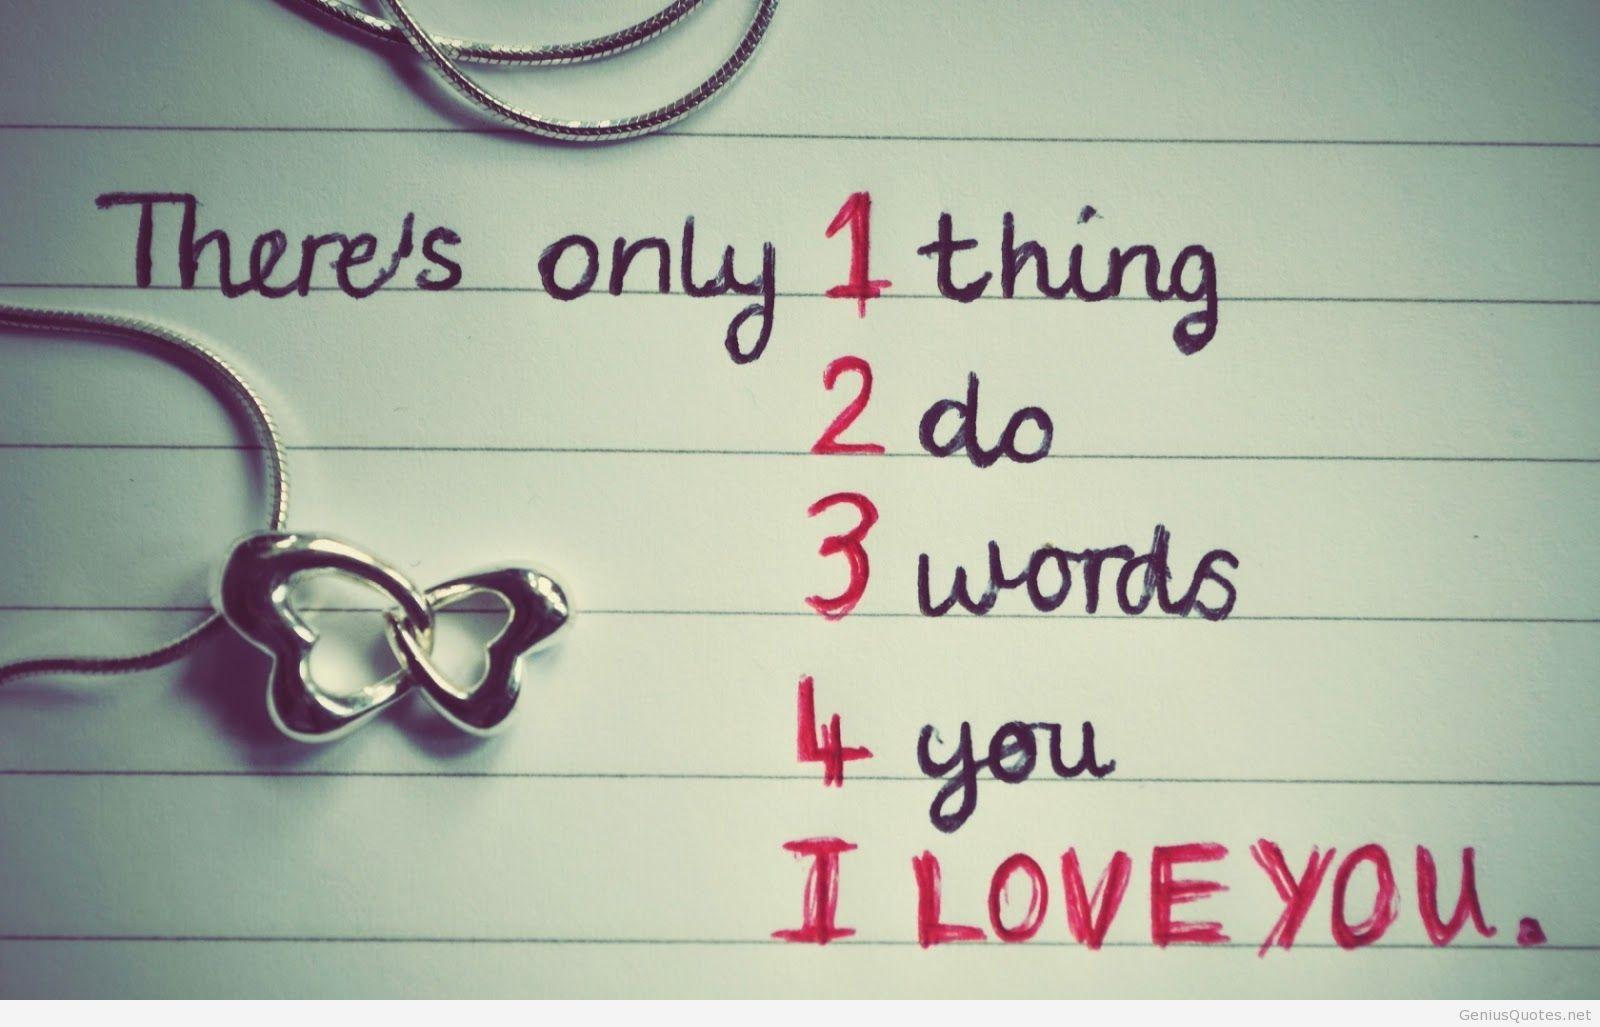 I stlill love you quotes with image and wallpaper